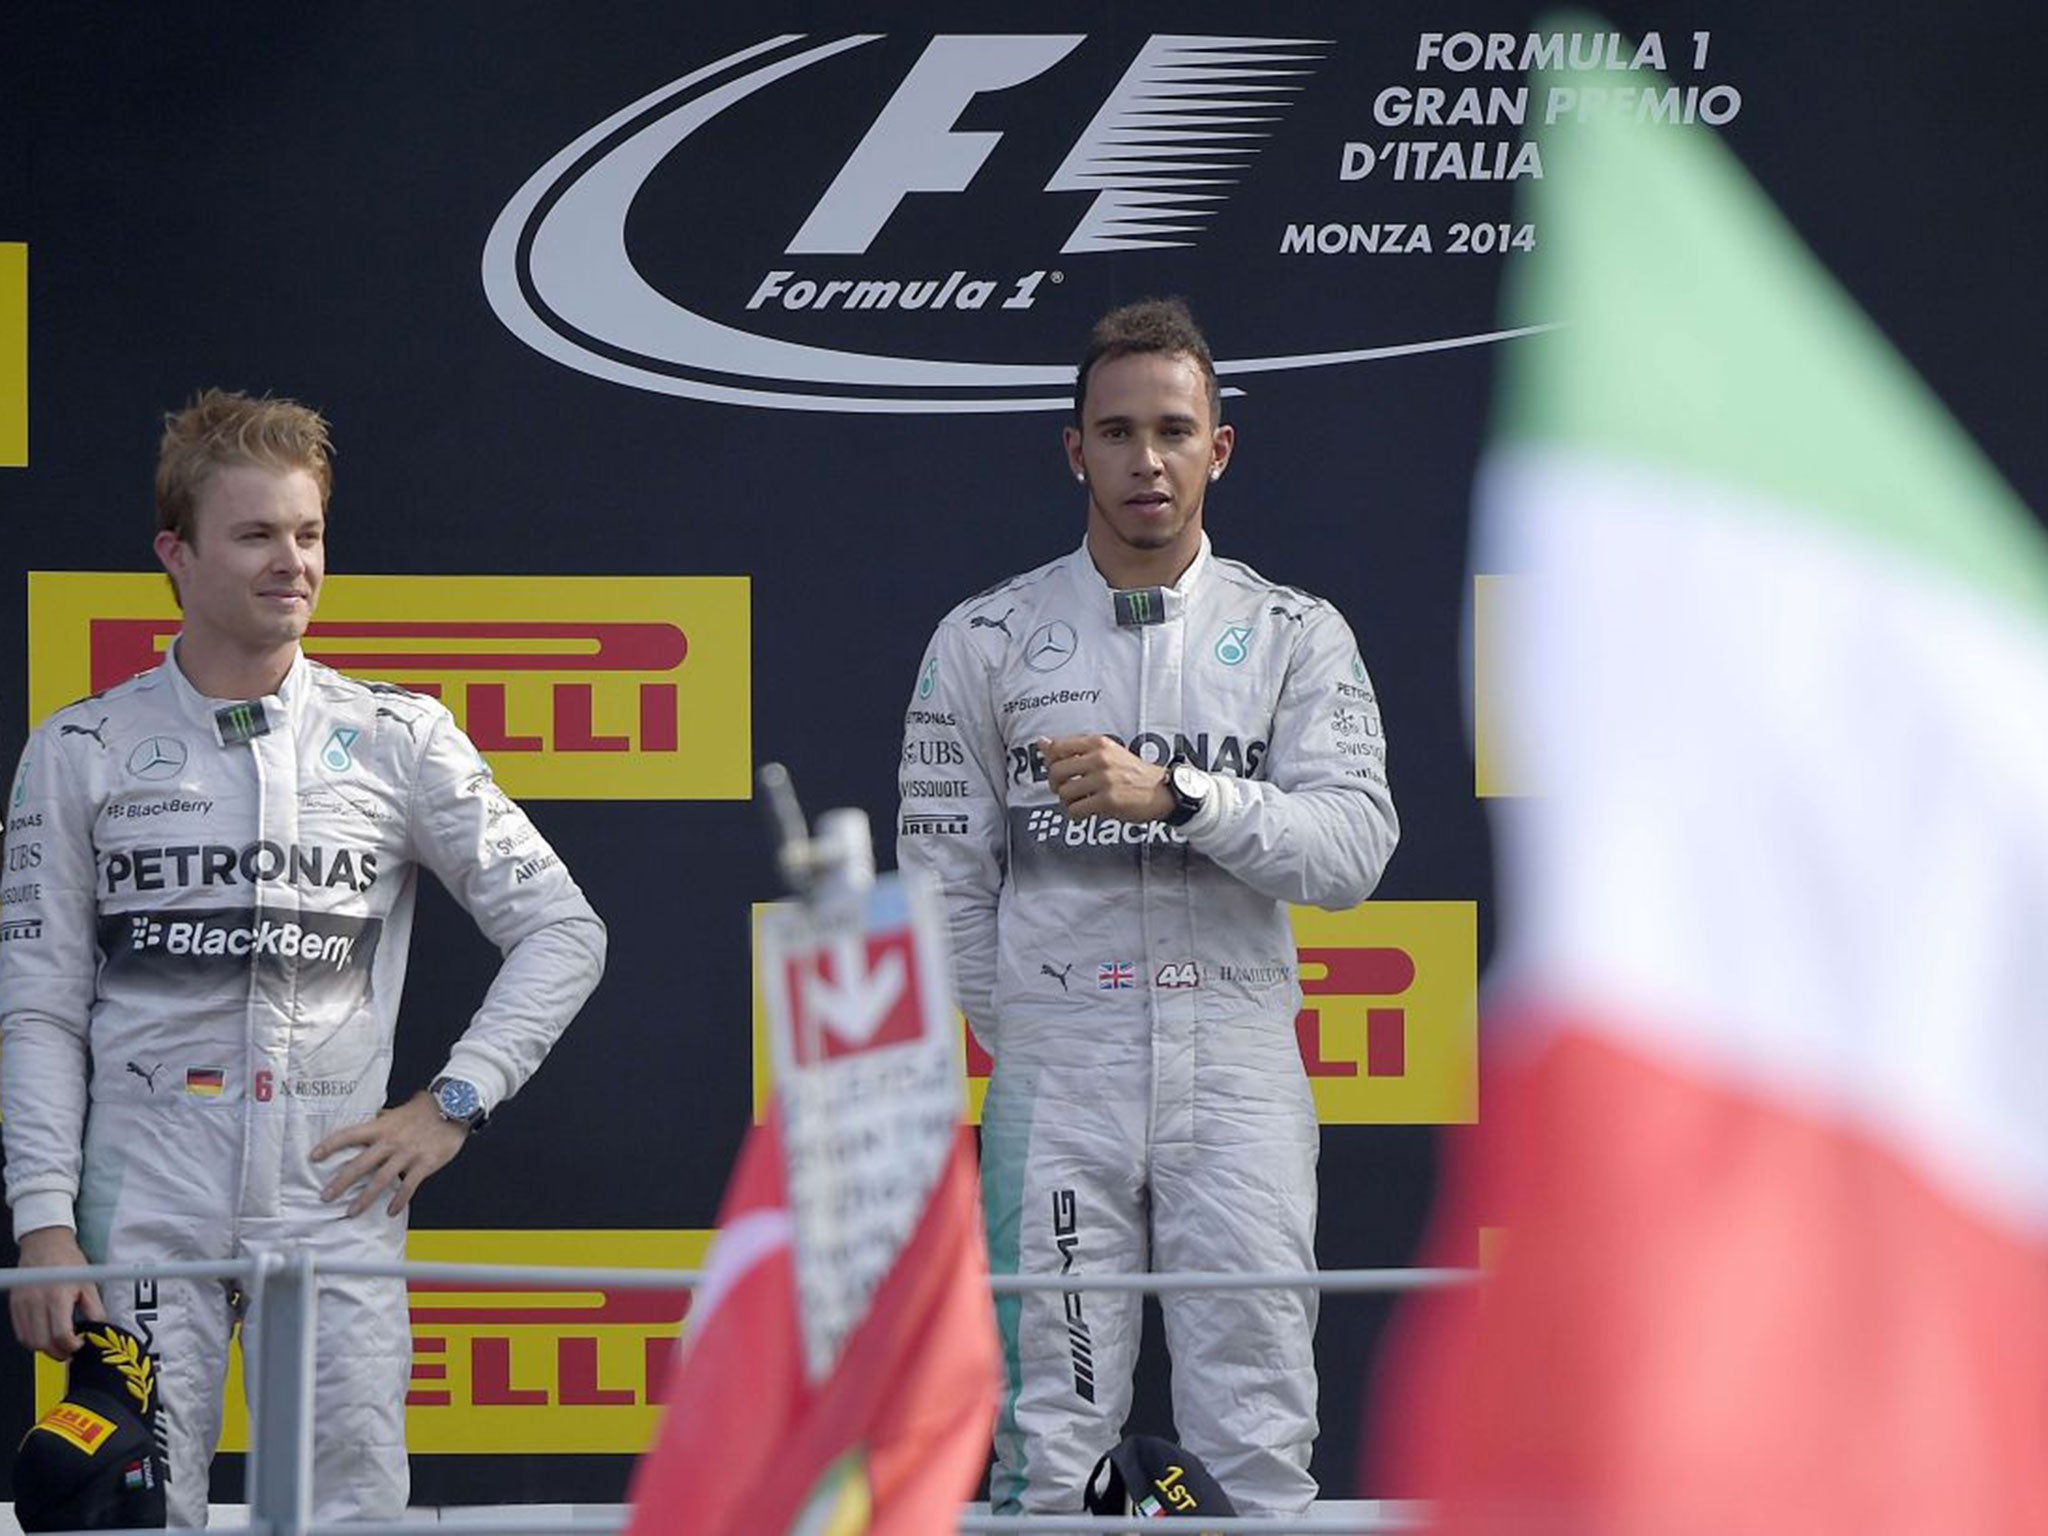 Lewis Hamilton (right) stands victorious on the podium ahead of second-placed Nico Rosberg